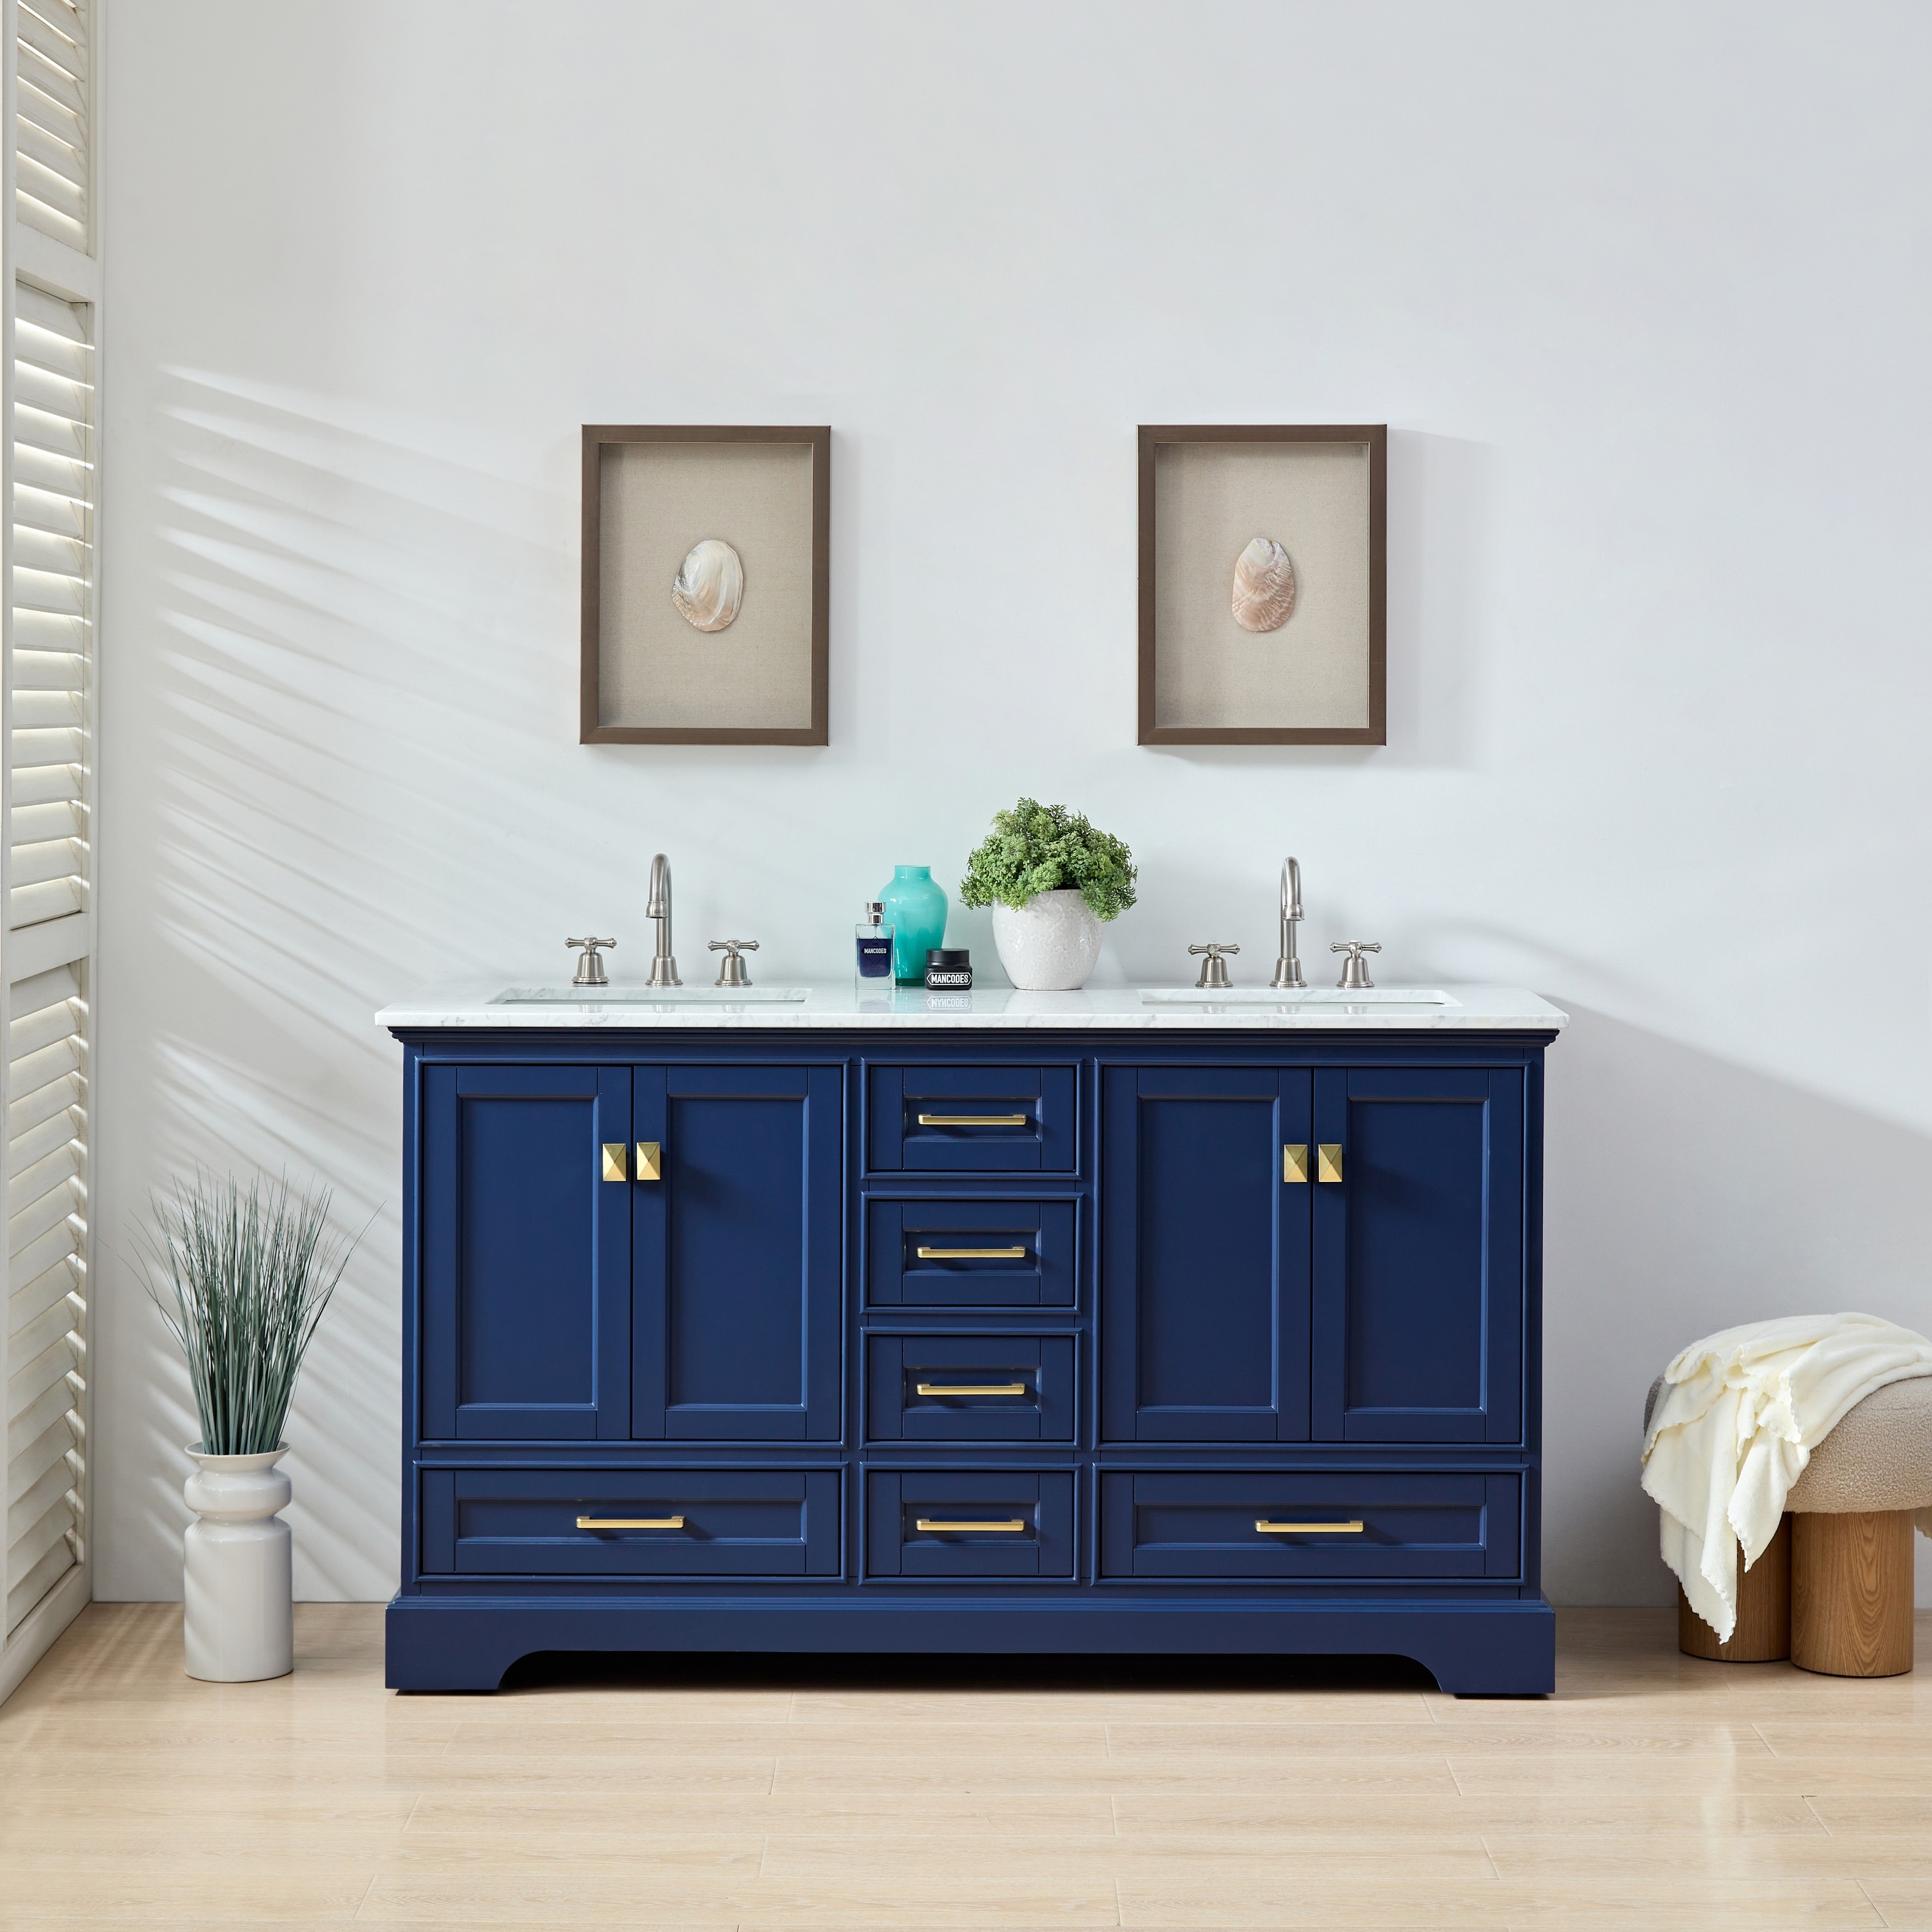 https://ak1.ostkcdn.com/images/products/is/images/direct/19620baf36673b349688ec3d91545a032cbc16ff/Stufurhome-Brittany-Dark-Blue-60-inch-Double-Sink-Bathroom-Vanity-with-Mirror.jpg